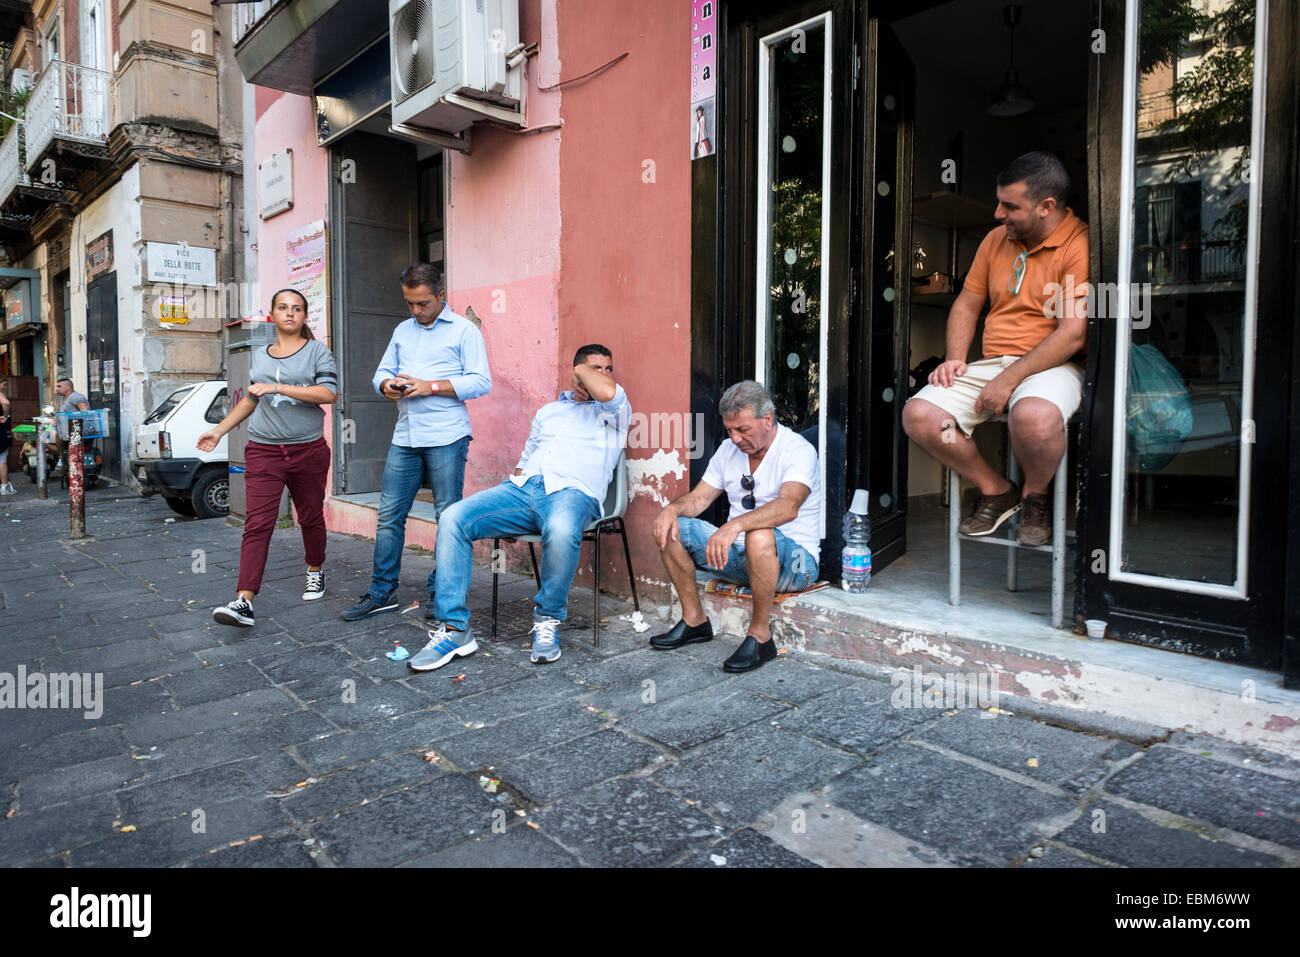 Watching the world go by on the streets of Naples. Stock Photo